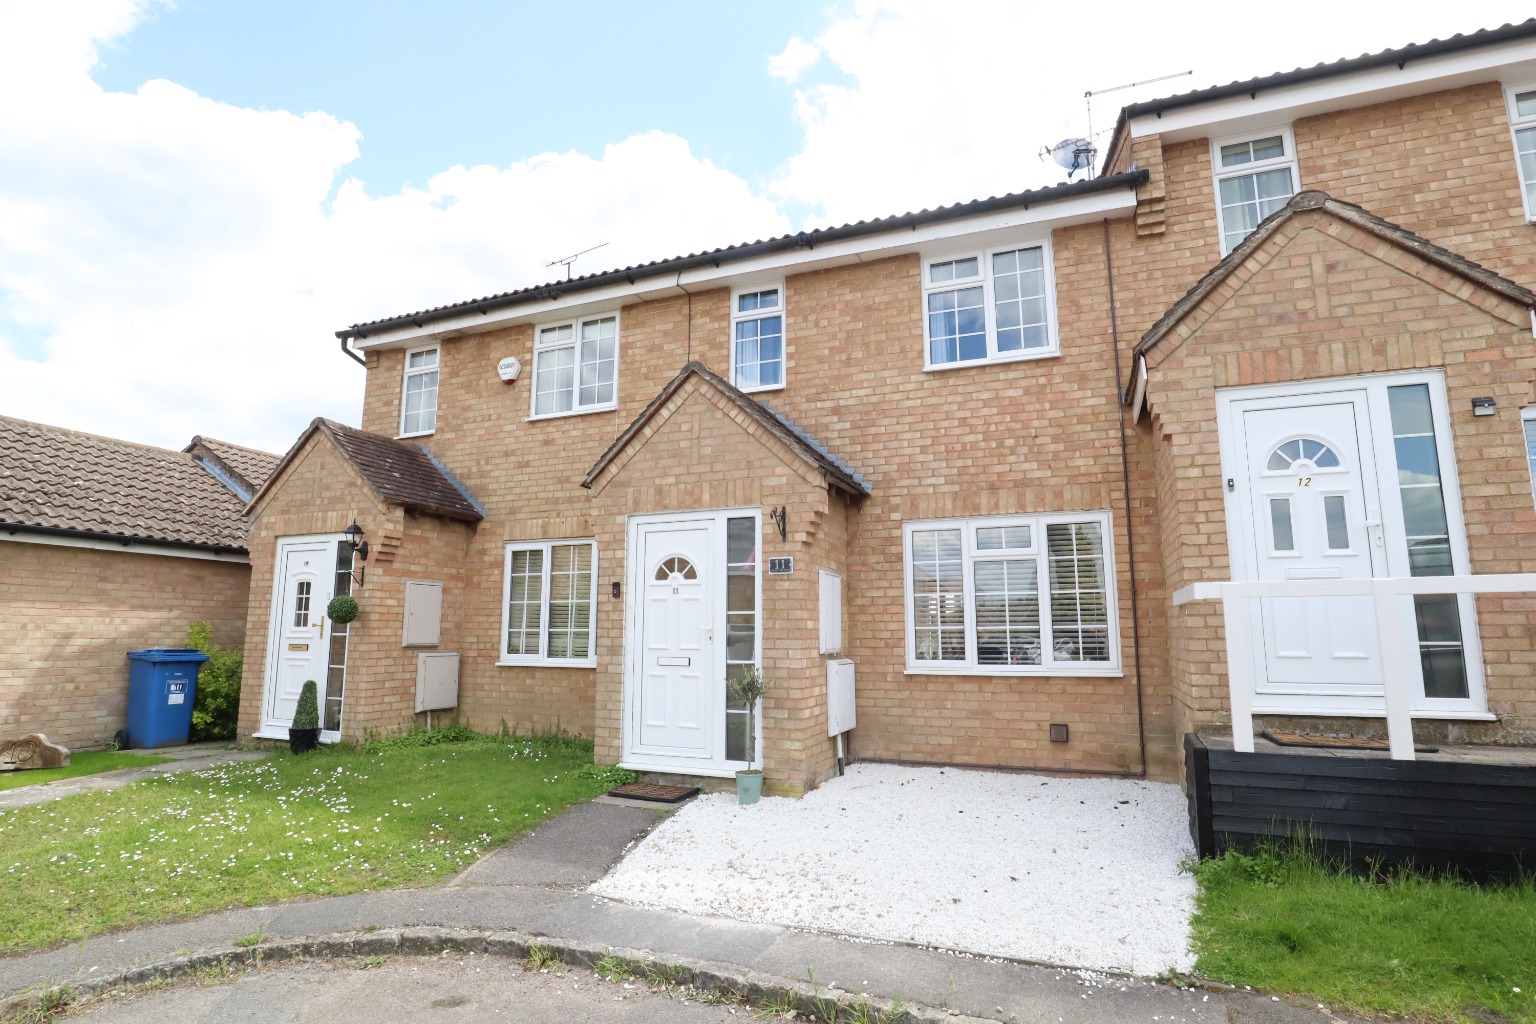 3 bed terraced house for sale in Cherrytree Close, Sandhurst, GU47